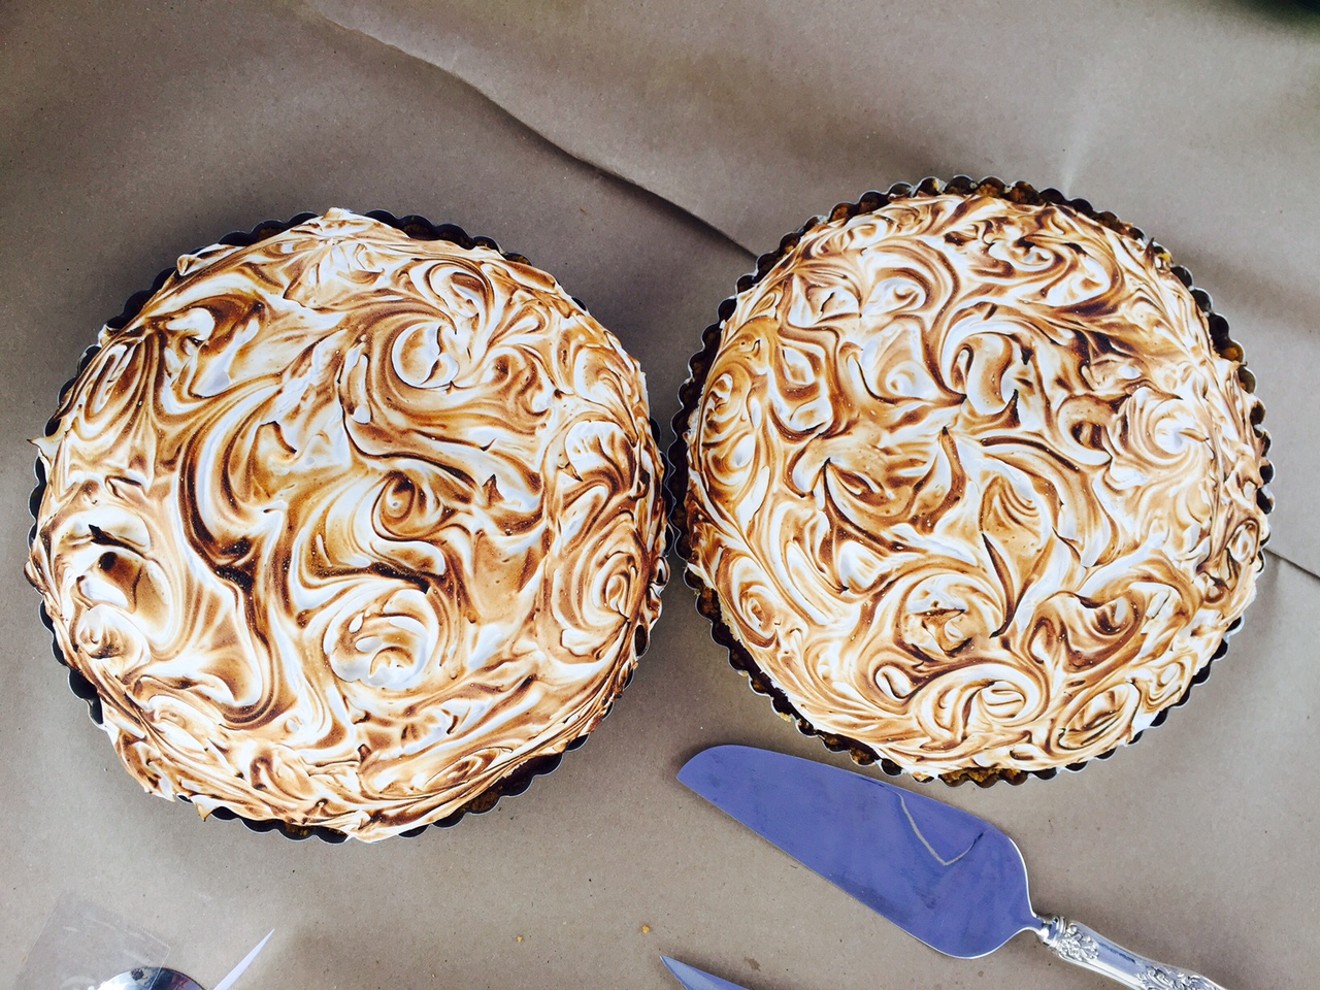 This weekend, there's an epic battle in East Dallas: a pie battle.